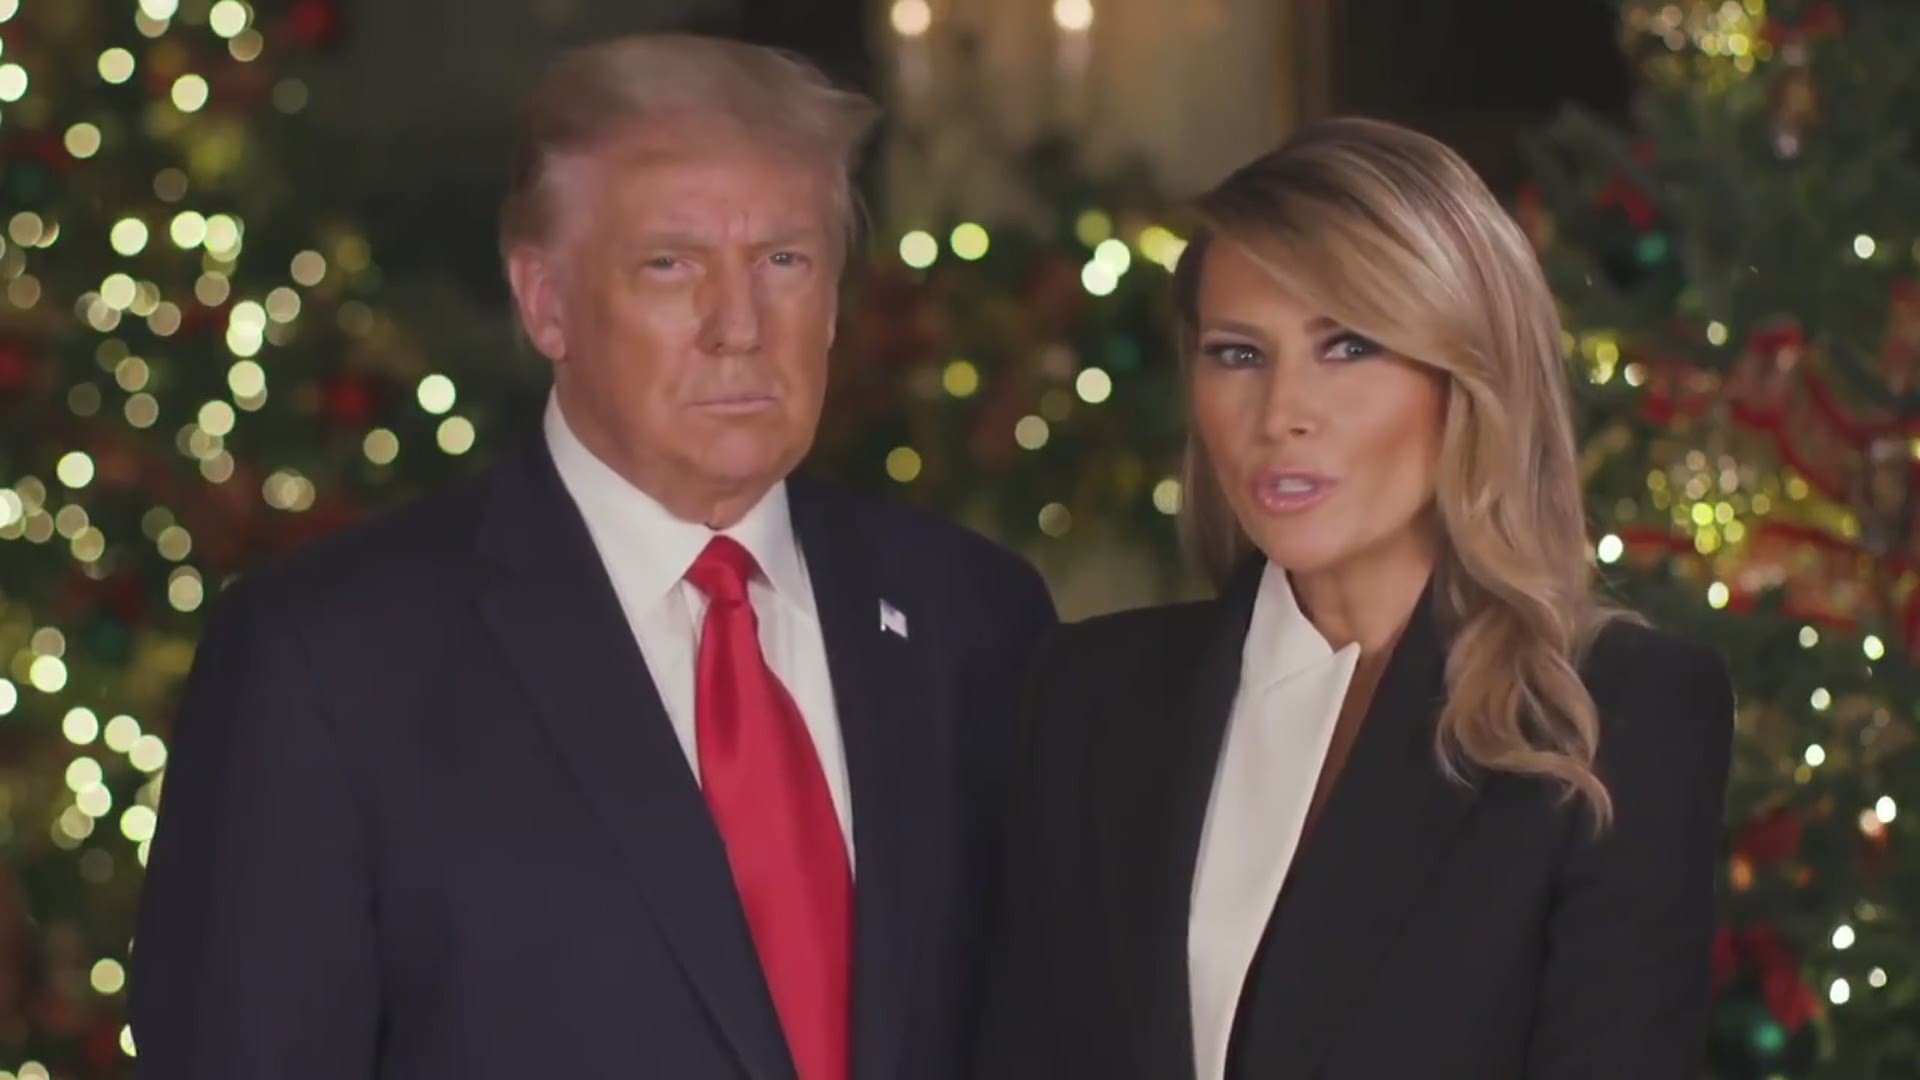 President Donald Trump and first lady Melania Trump tweeted out their annual holiday message praising the coronavirus vaccine as "a Christmas miracle."